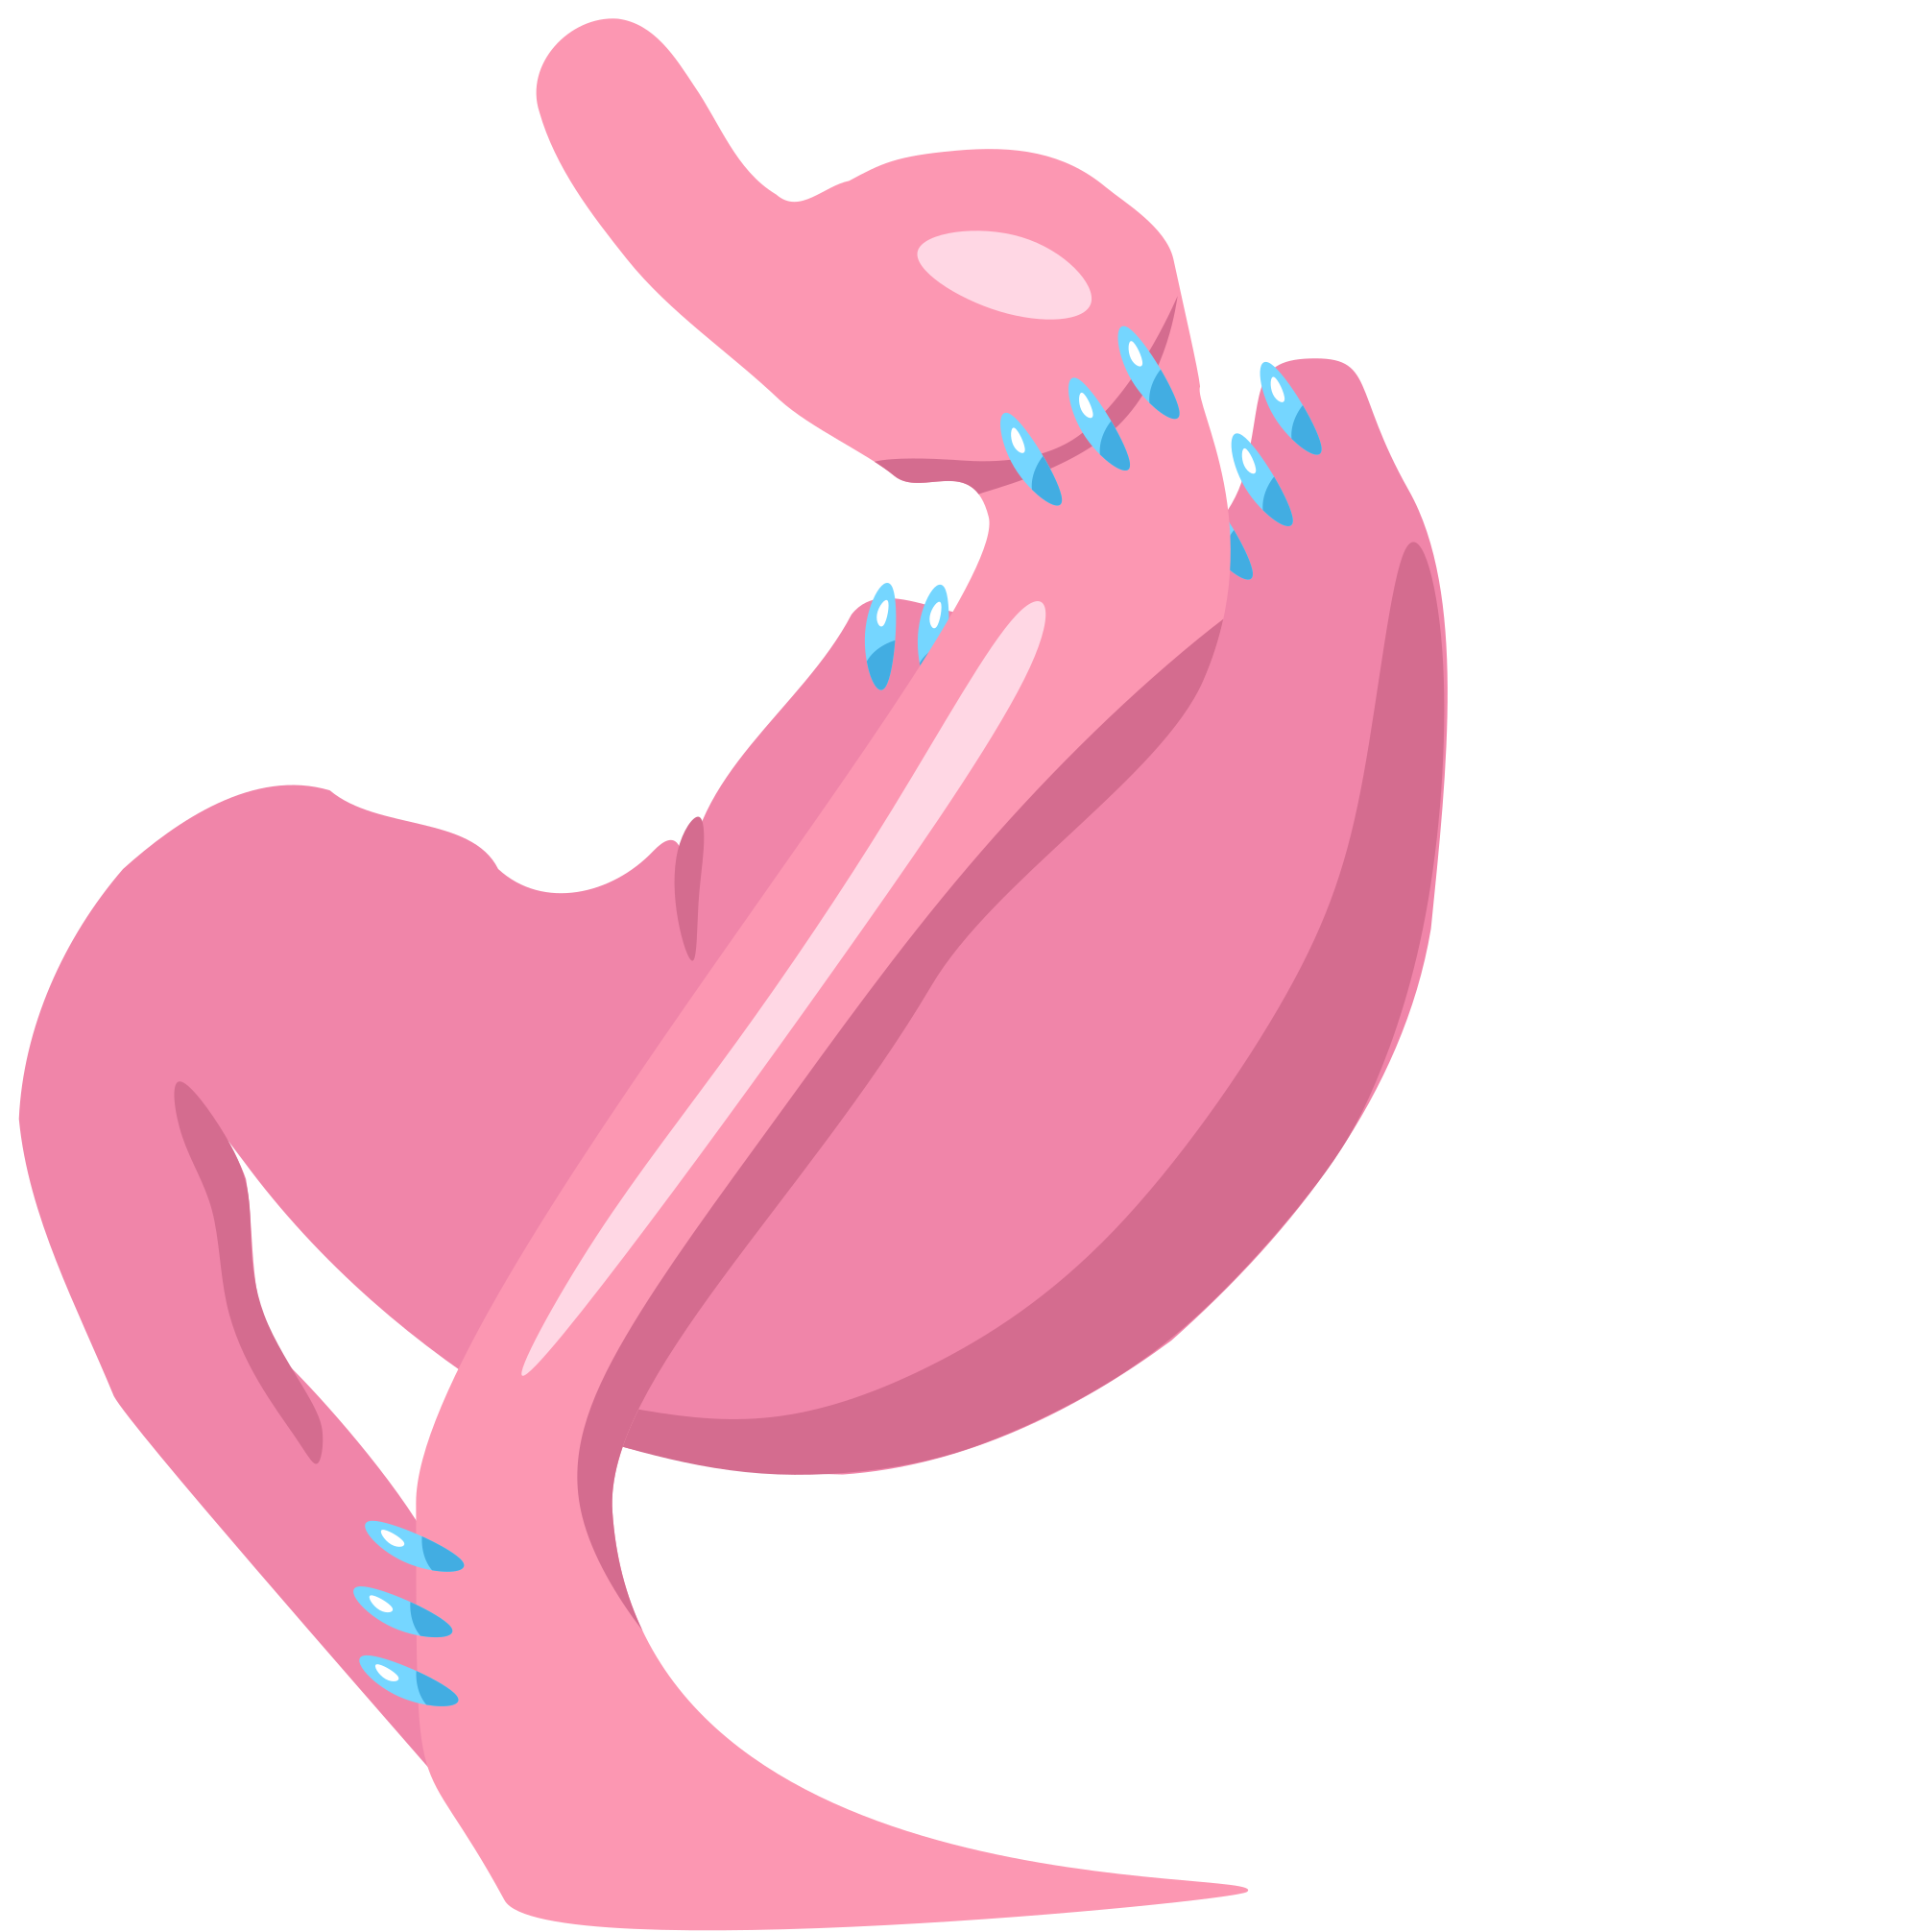 Gastric bypass surgery wikipedia. Hurt clipart epigastric pain